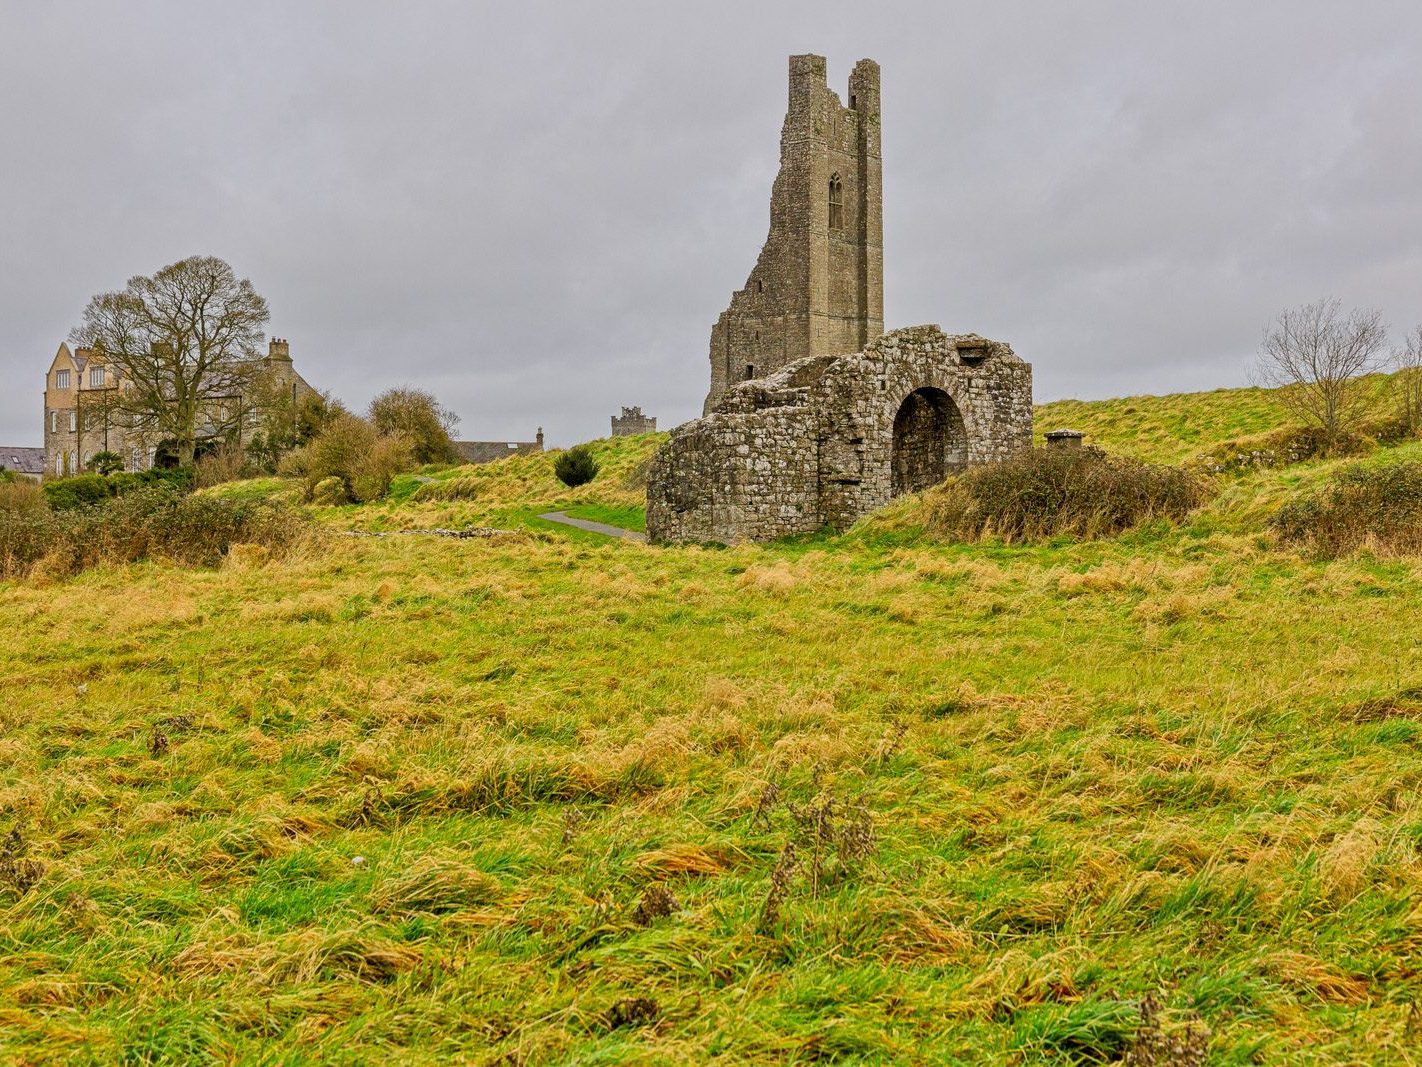 THE YELLOW STEEPLE DOMINATES THE TOWN OF TRIM [ALSO KNOWN AS ST MARYS ABBEY]-226737-1